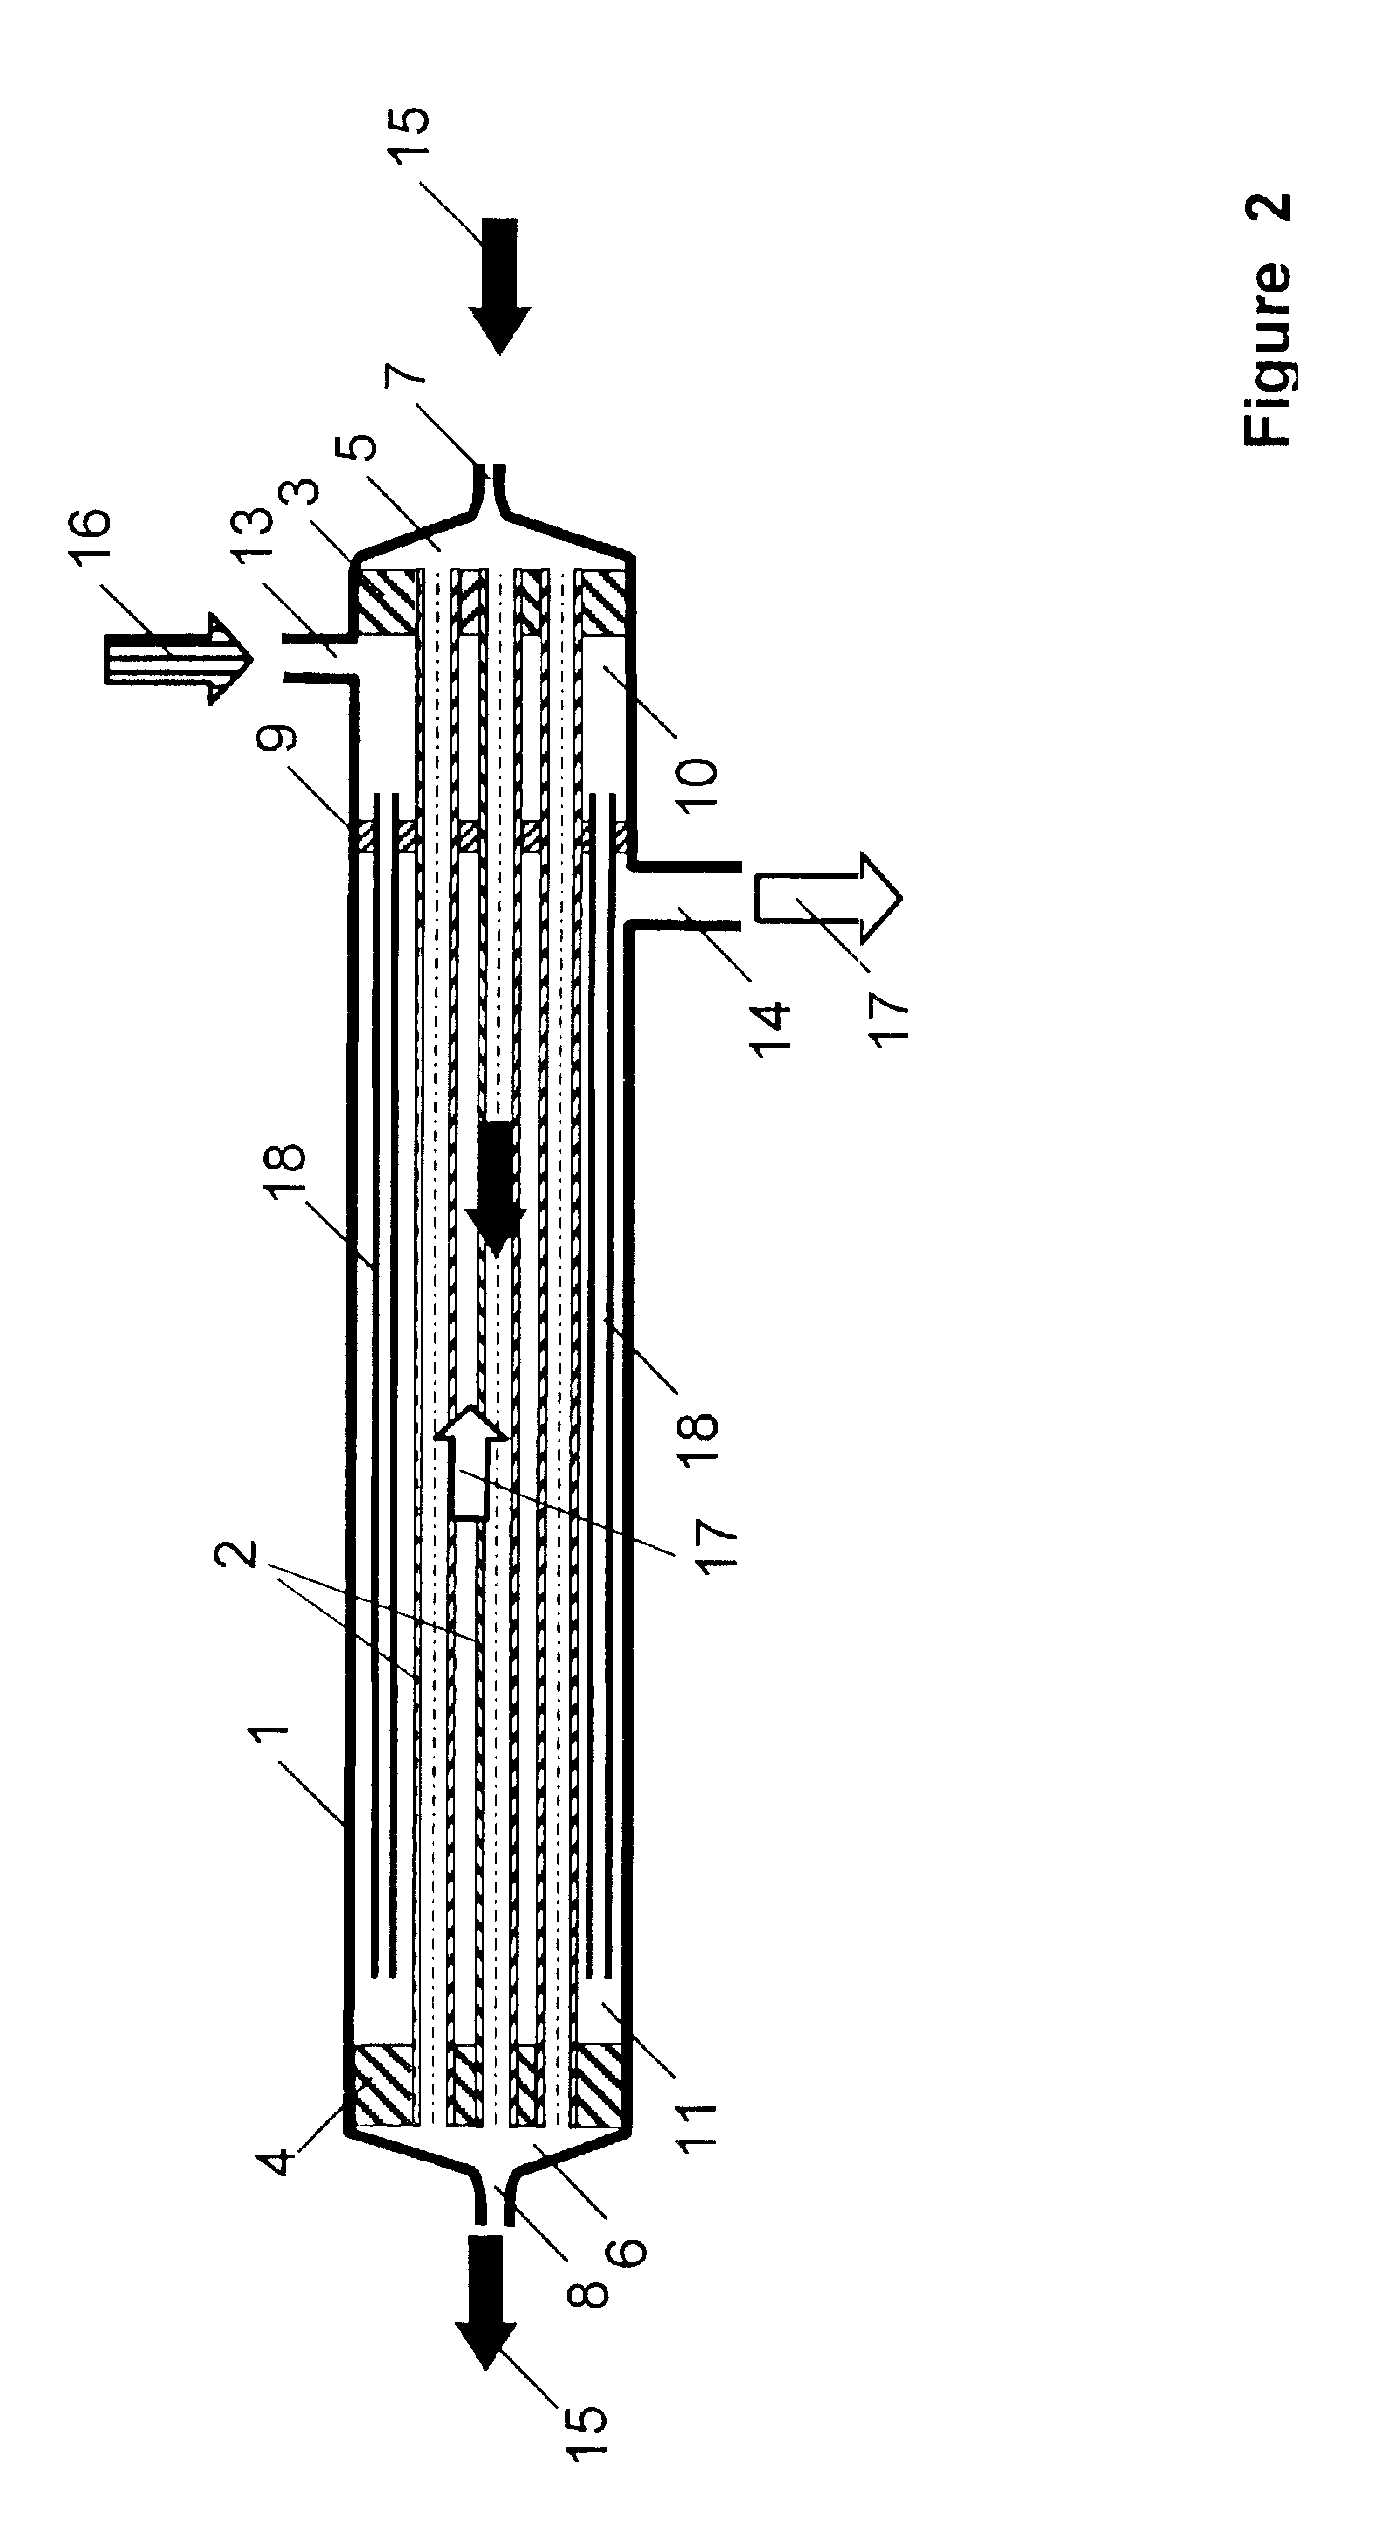 Membrane module for the hemodiafiltration with integrated pre- or postdilution of the blood